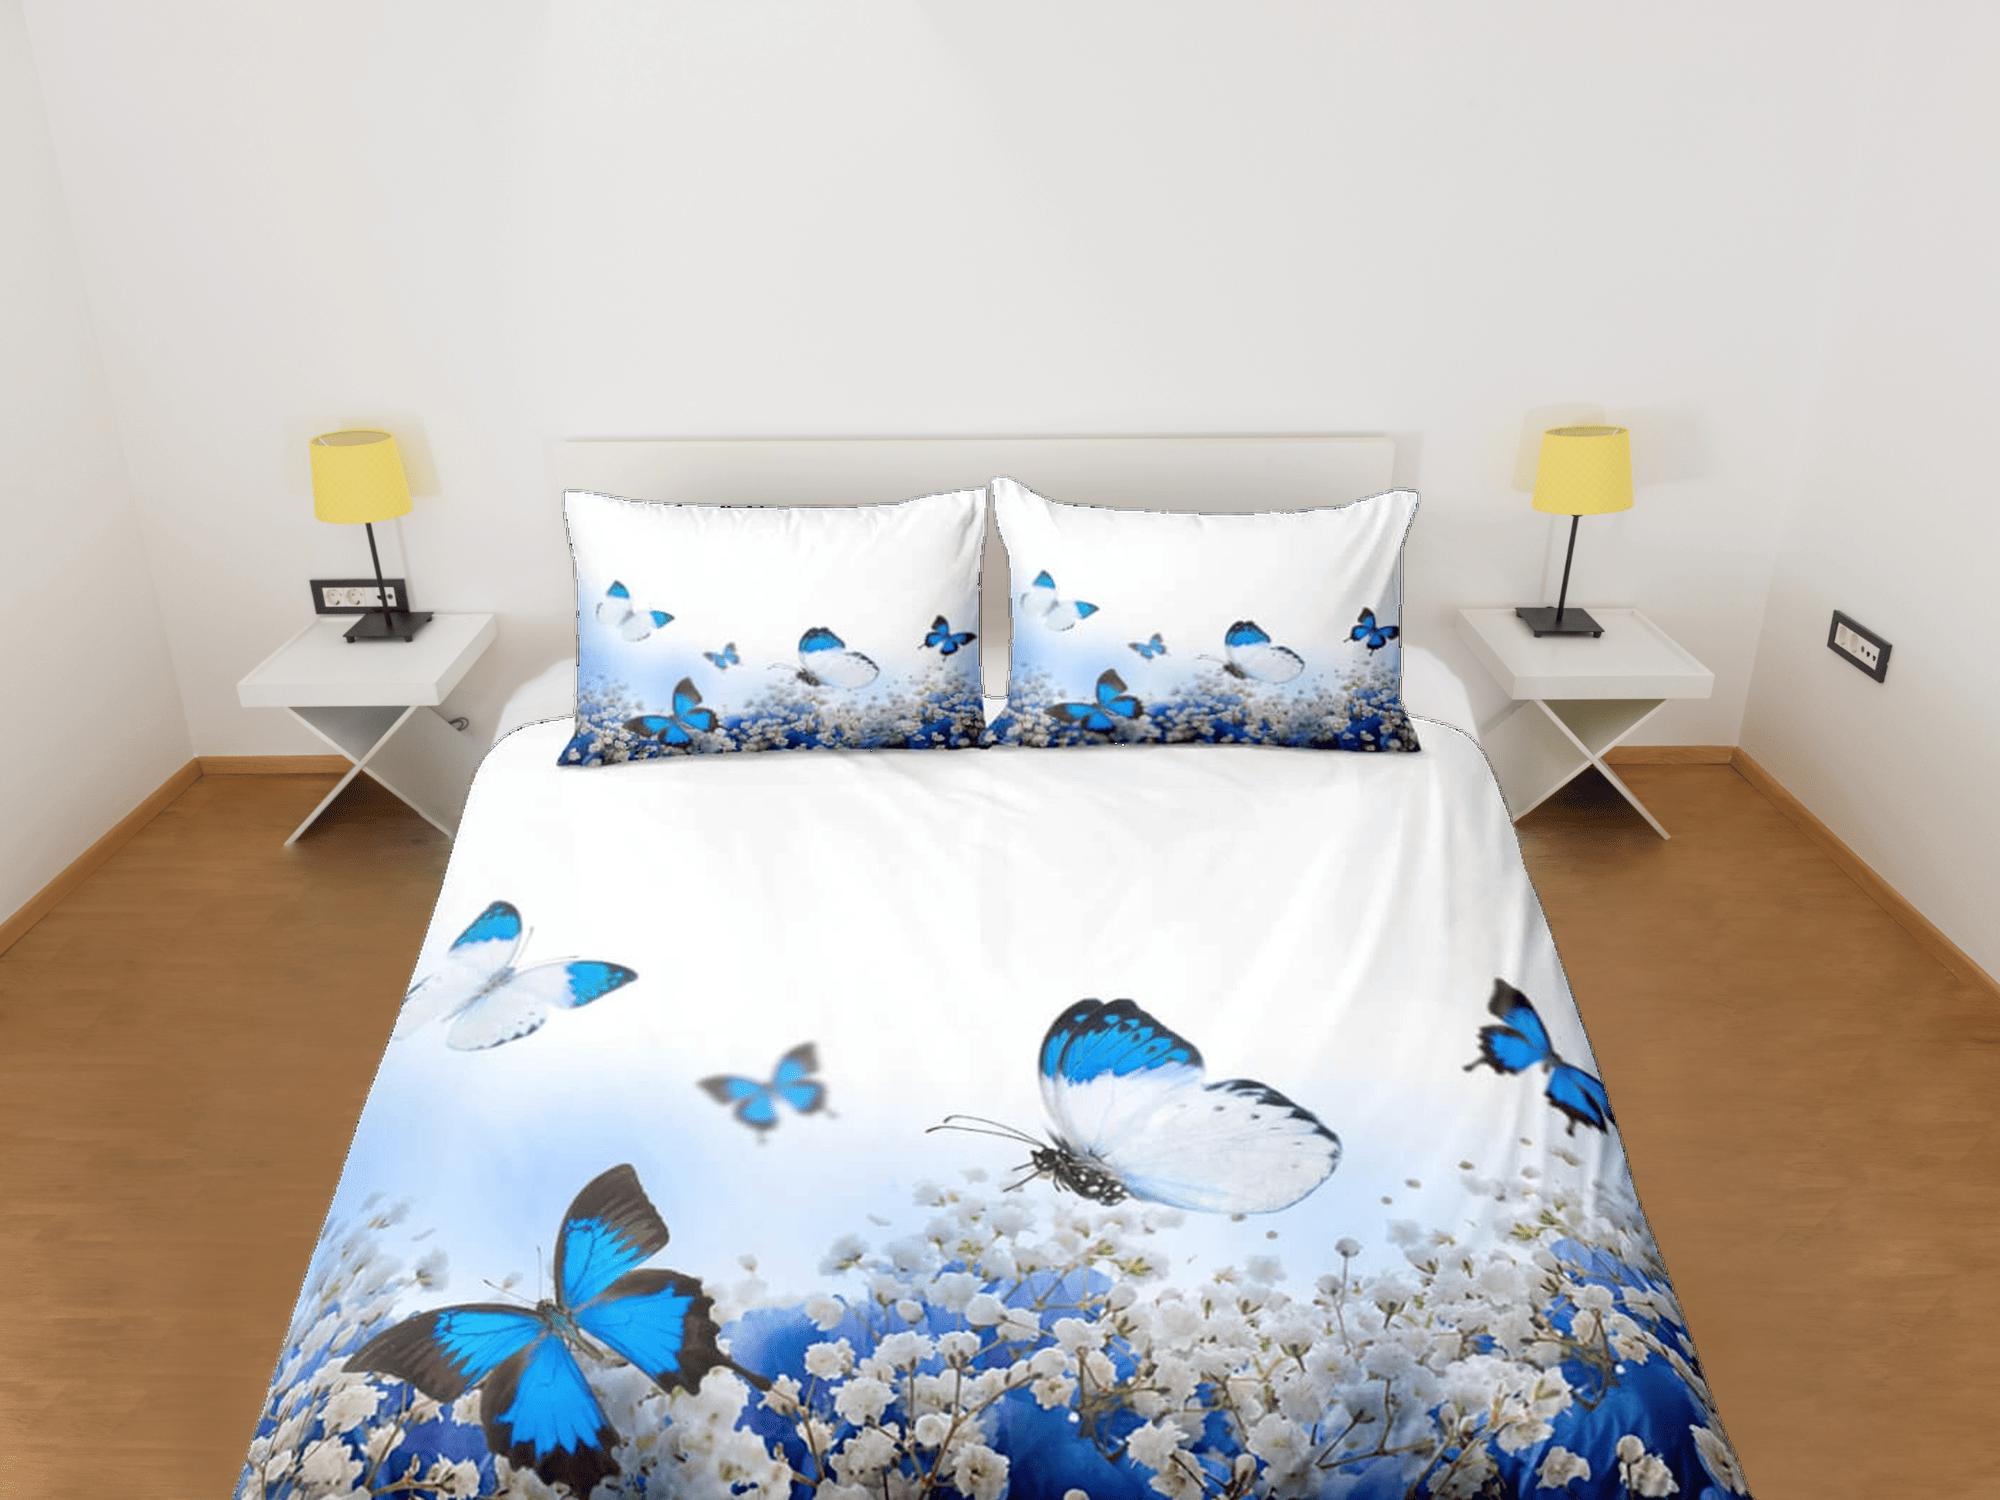 daintyduvet Blue monarch butterfly bedding duvet cover colorful dorm bedding, full size adult duvet king queen twin, butterfly nursery toddler bedding